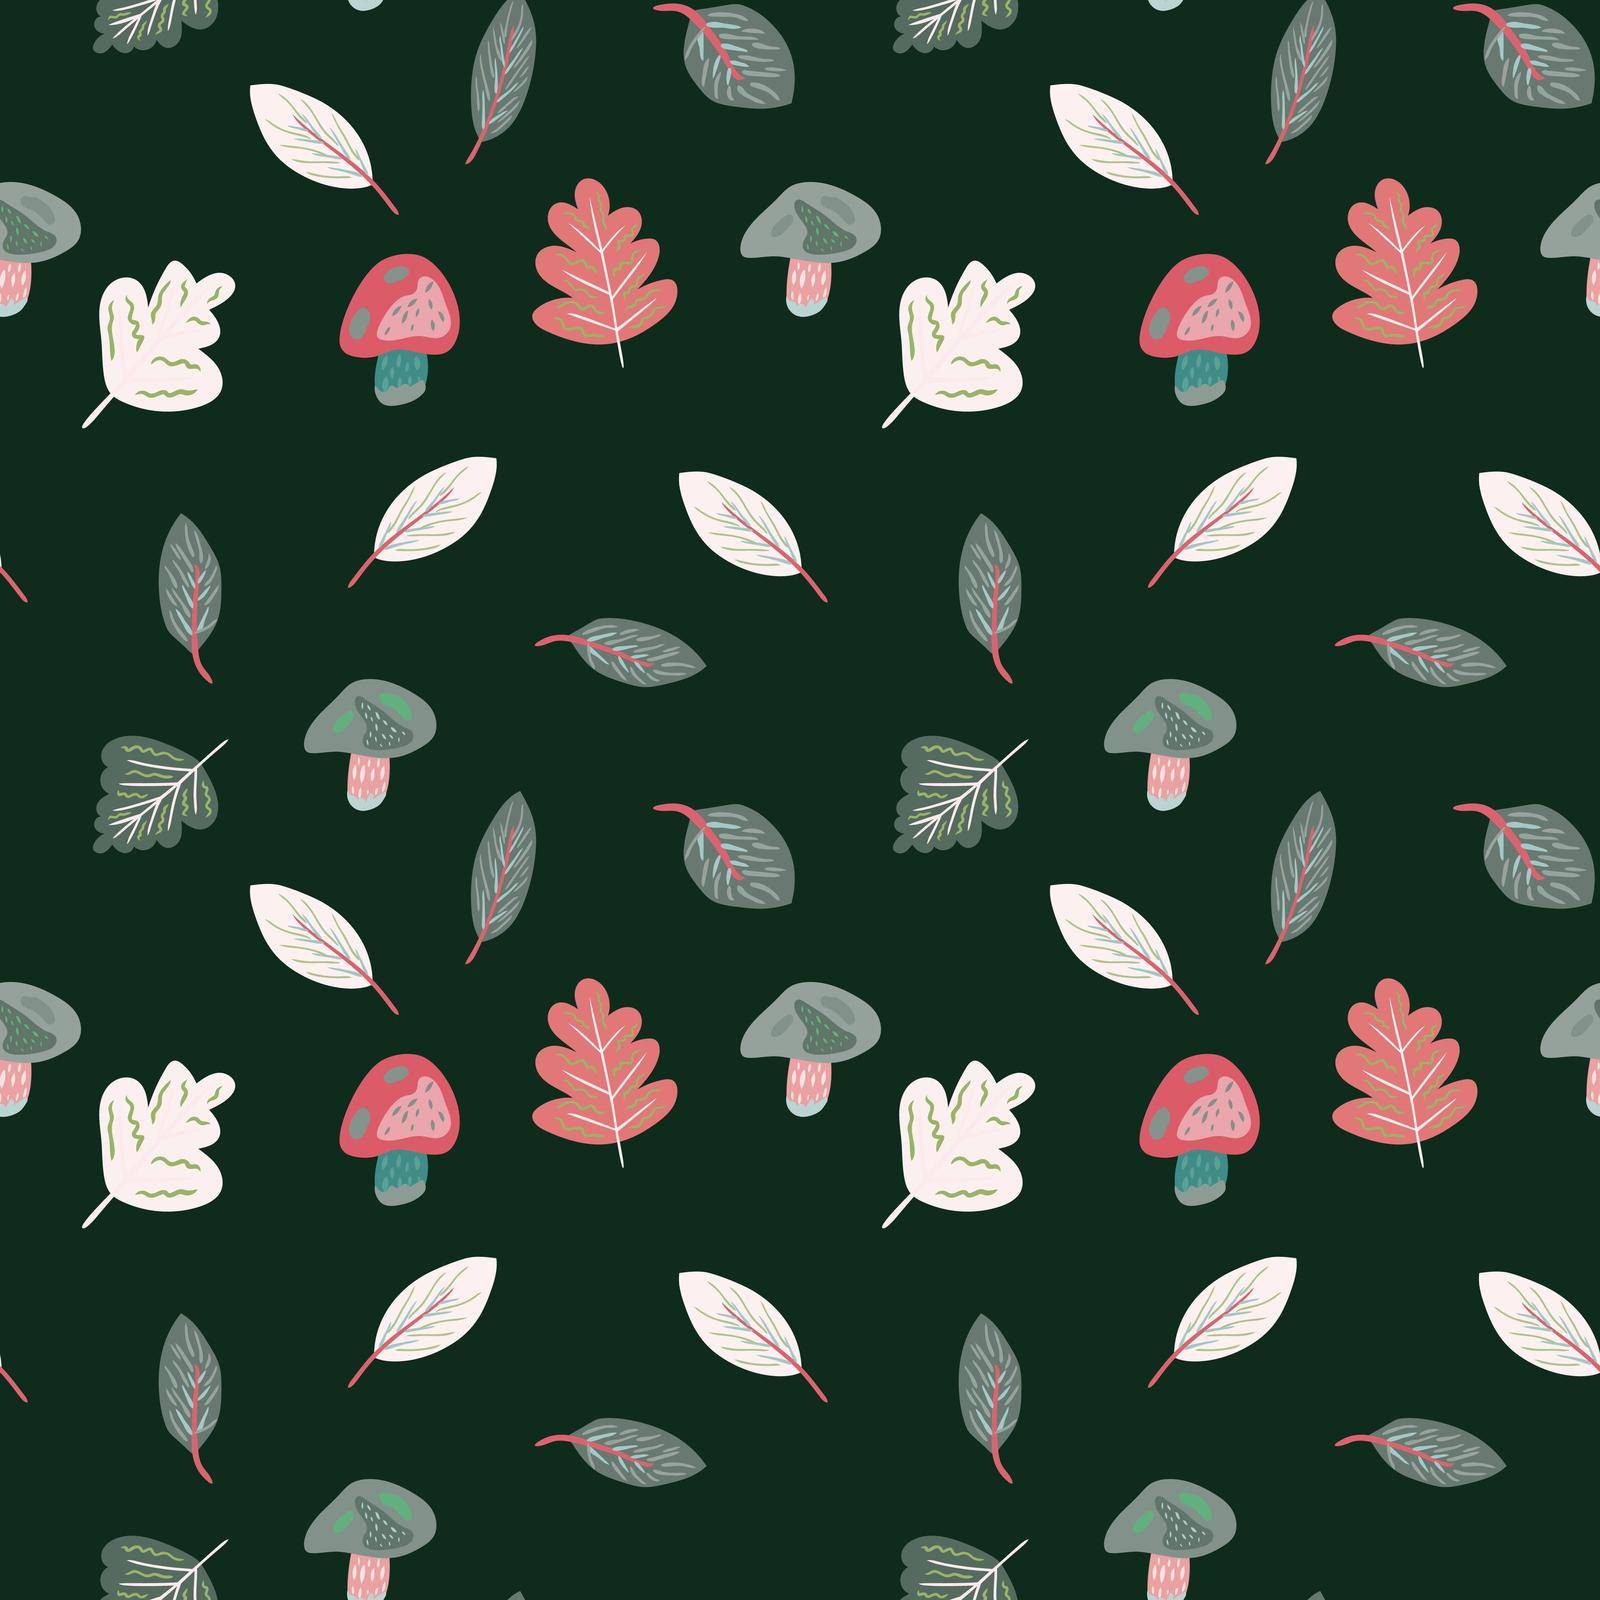 Seamless vector pattern in green autumn colors with mushrooms, leaves, etc. Wallpaper, scrapbooking, textie and other surface design.